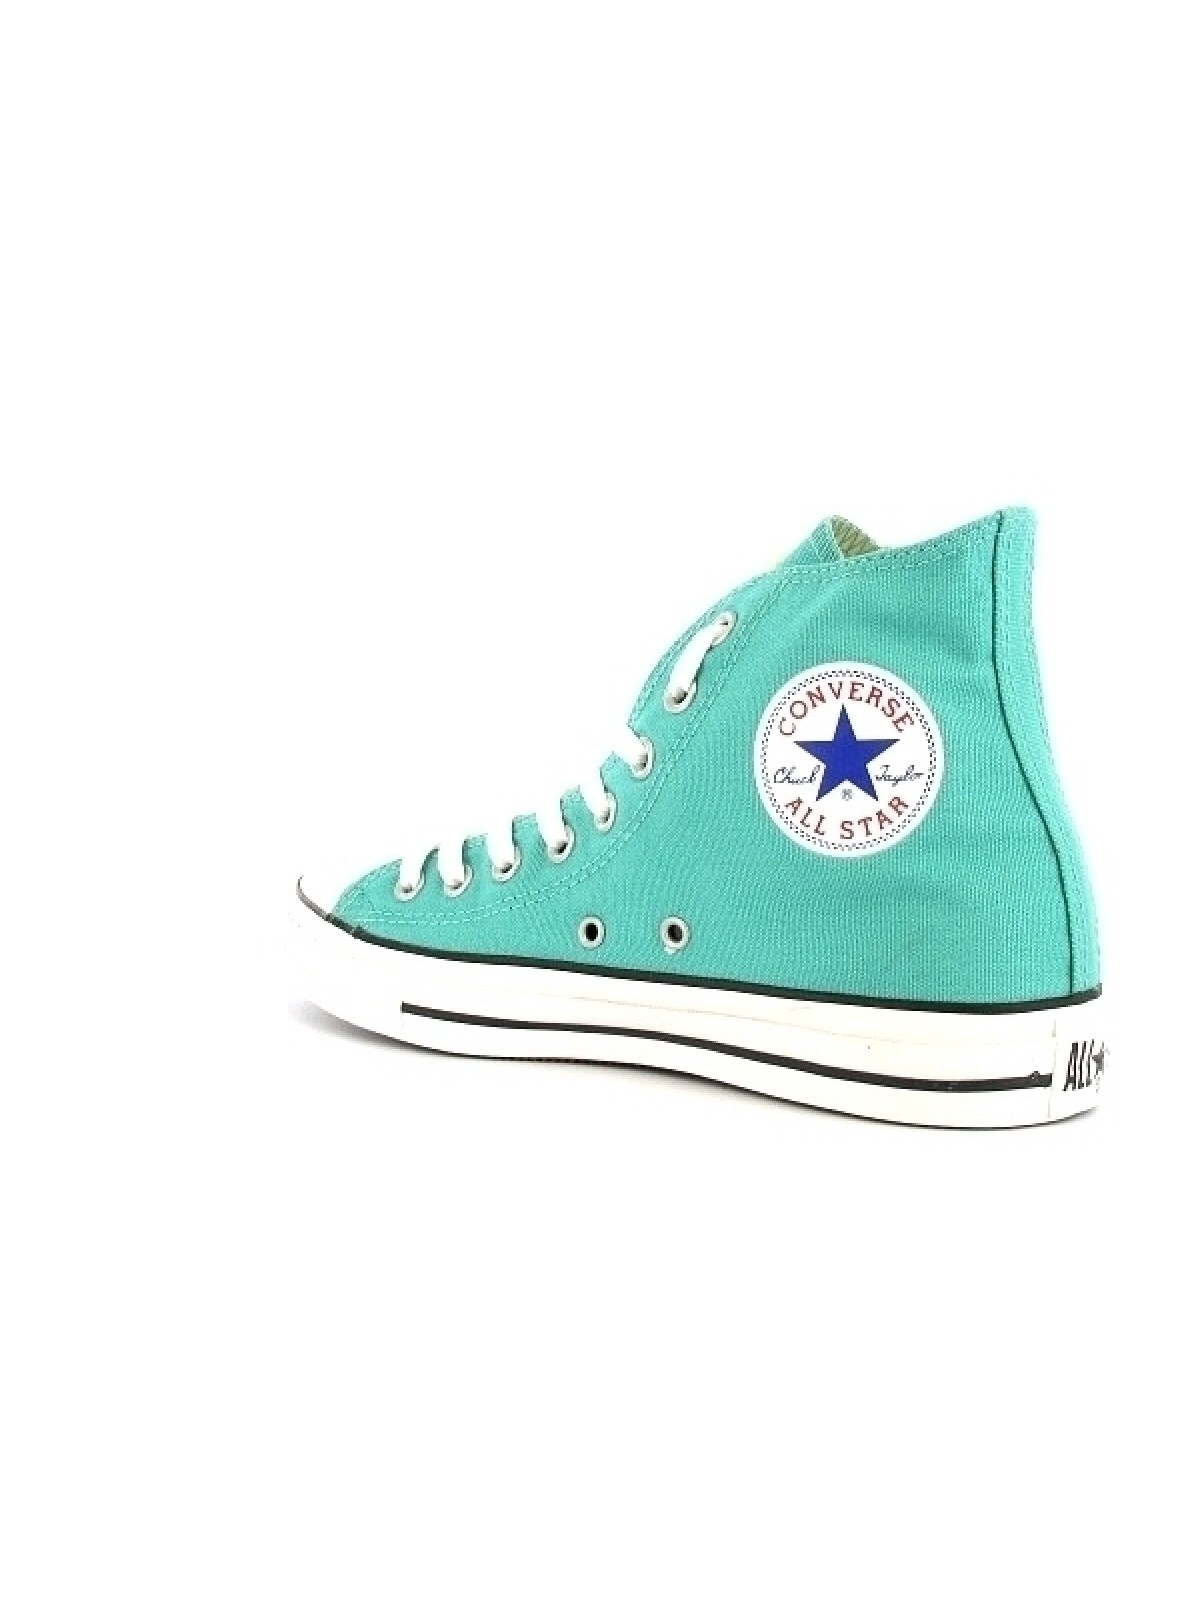 converse all star basse turquoise